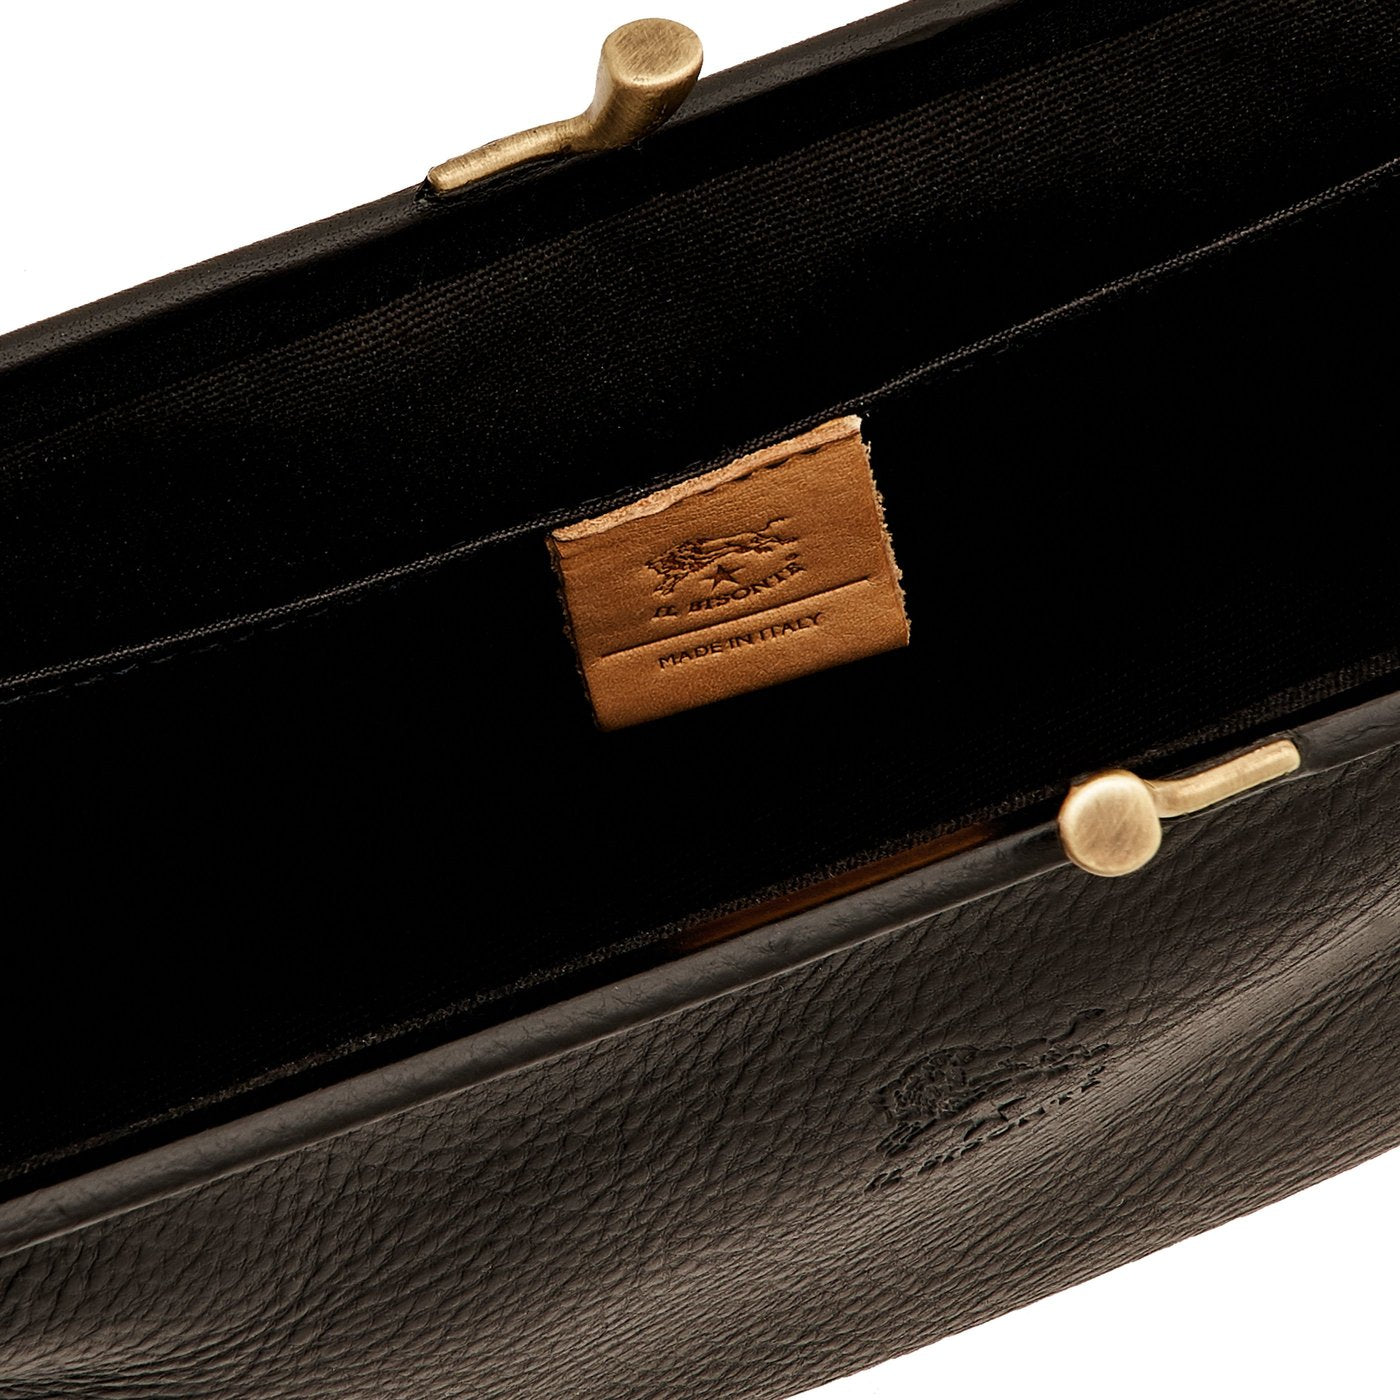 Women's clutch bag in leather color black – Il Bisonte